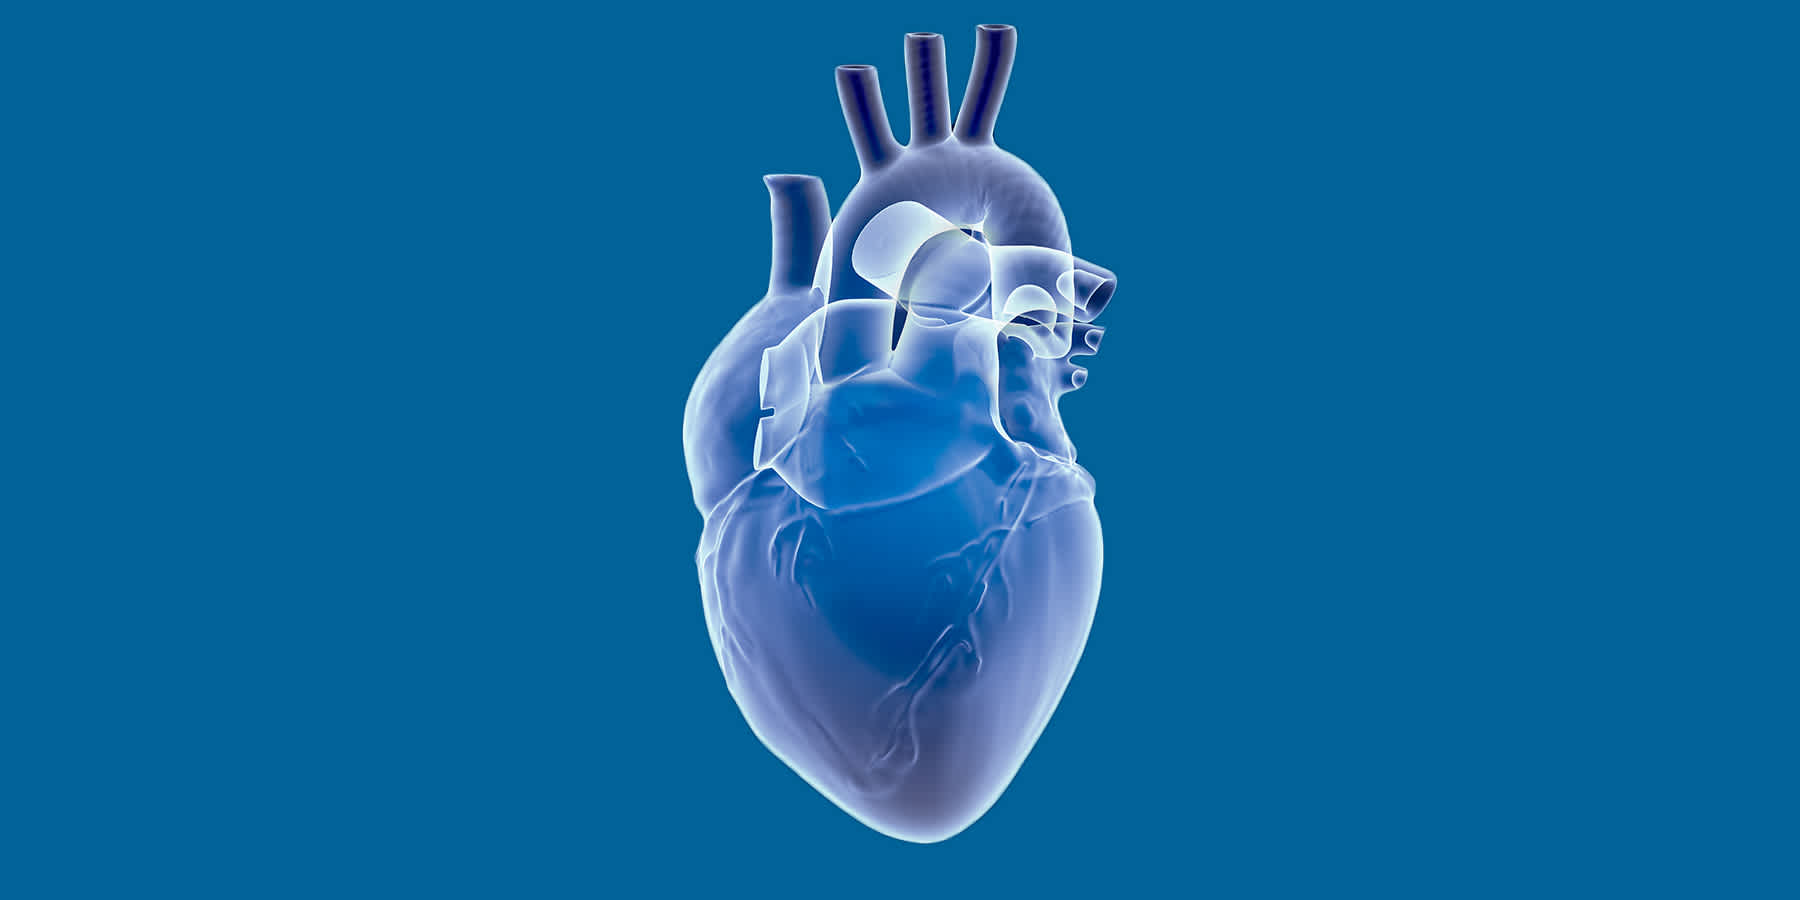 Illustration of anatomical heart against a blue background